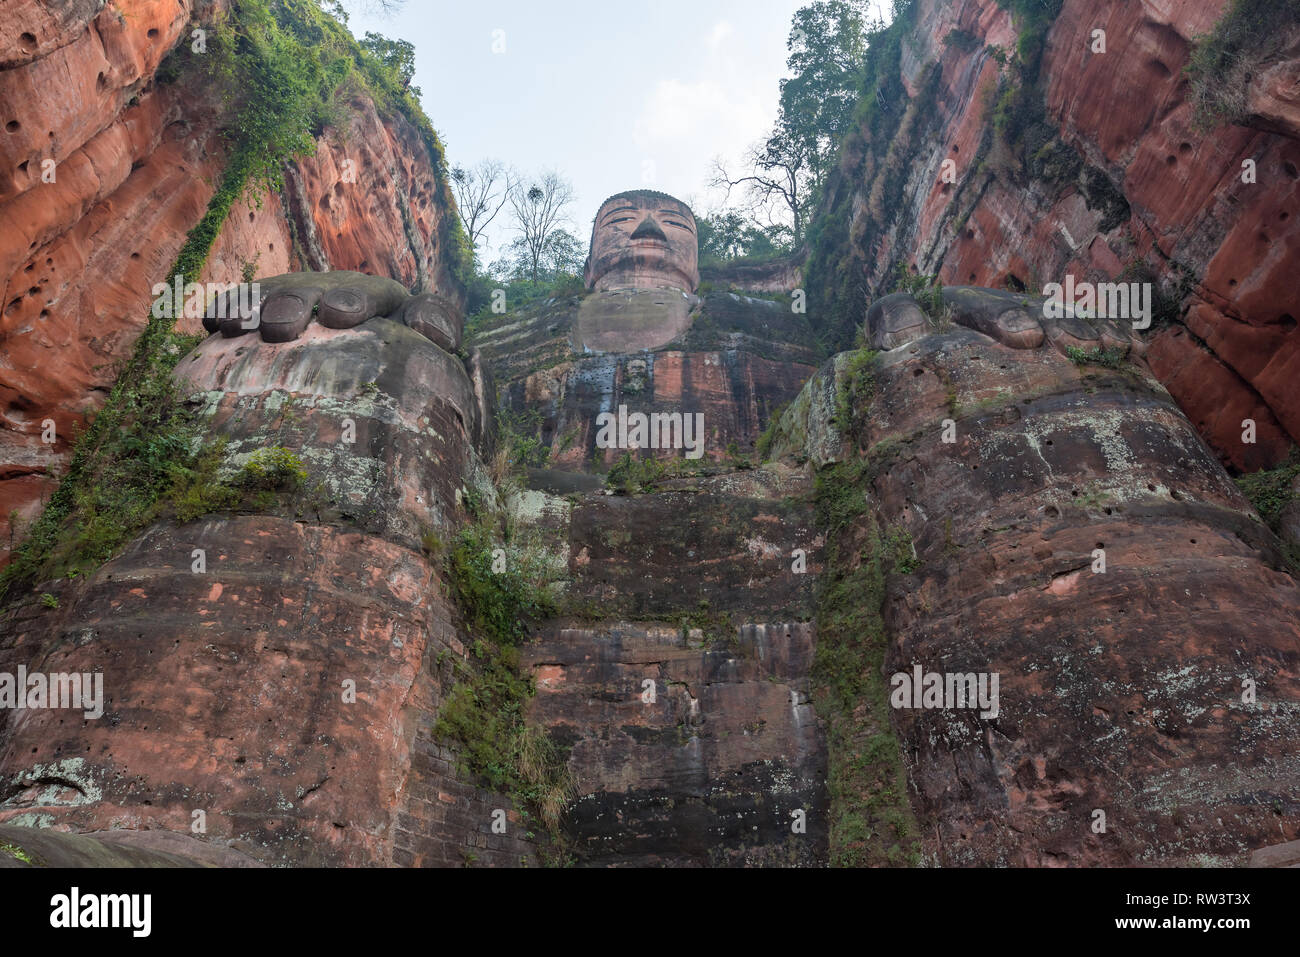 Leshan, Chengdu, Sichuan province, China - Jan 25, 2016: Leshan Giant Buddha - 71m - is the world's biggest stone sitting buddha statue and a touristic famous spot in Sichuan province. Stock Photo